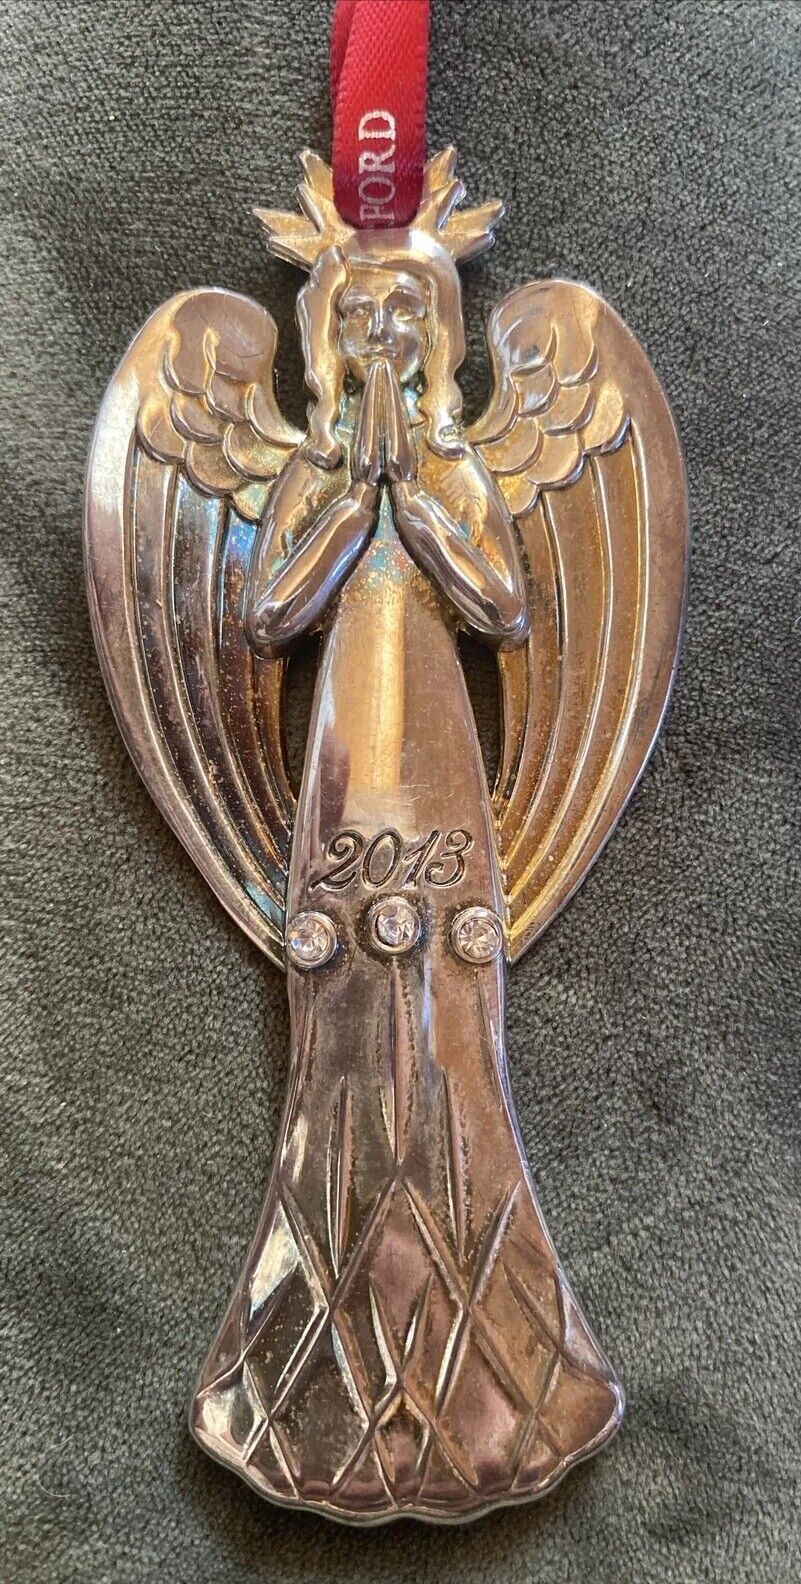 2013 Waterford Silver Colored Praying Angel Ornament 3 Diamond Color Stones